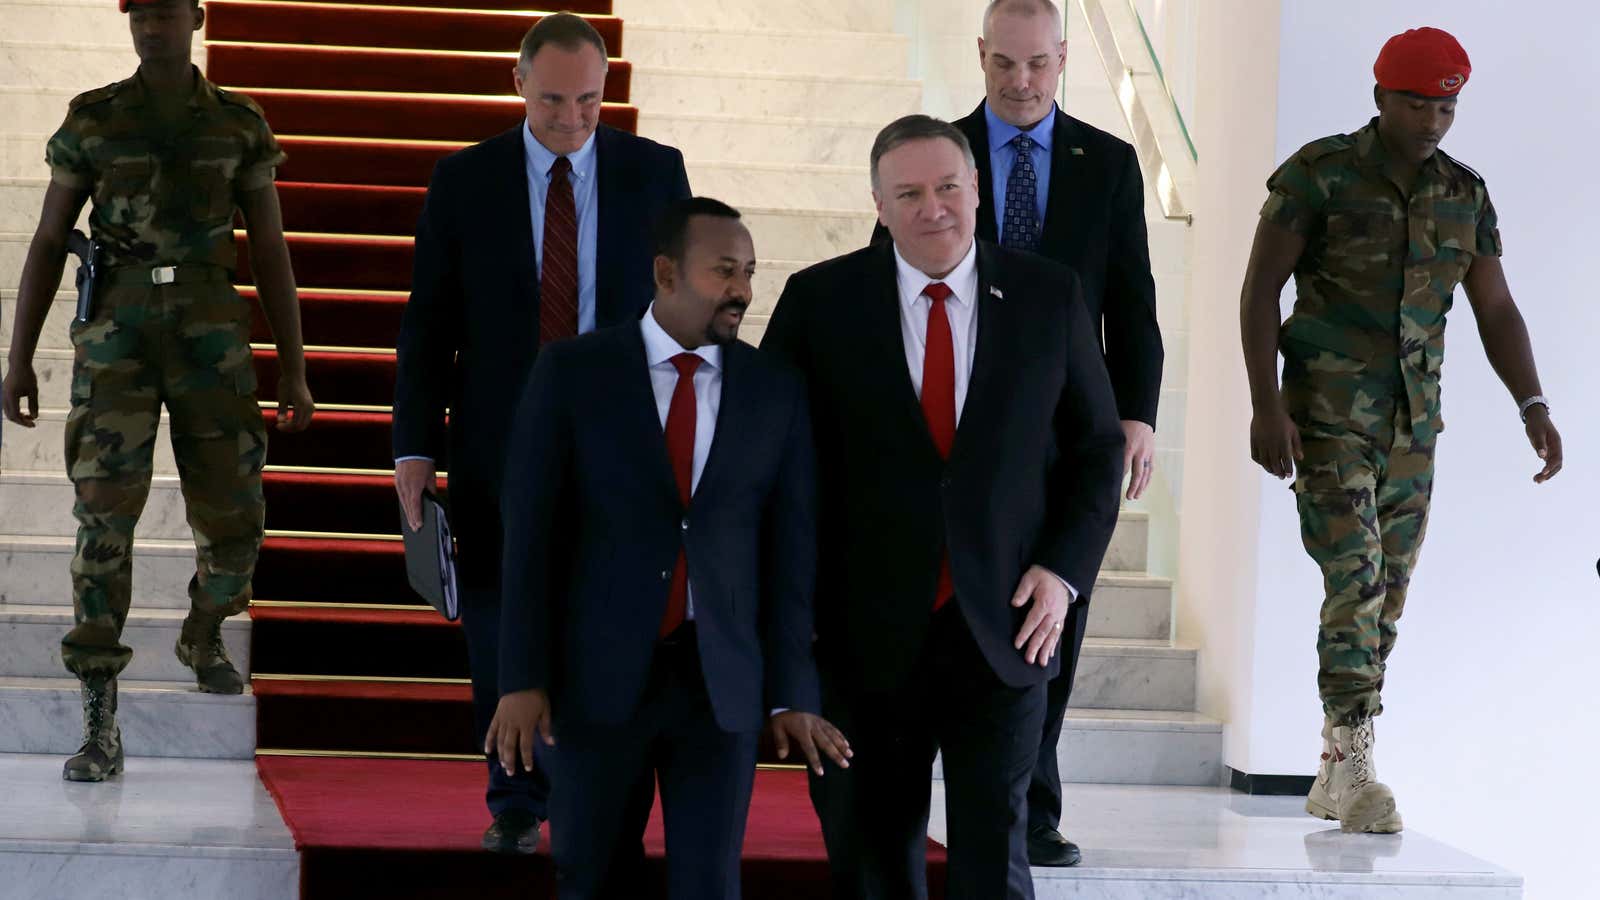 Ethiopia prime minister Ahmed Abiy and US secretary of state Pompeo.